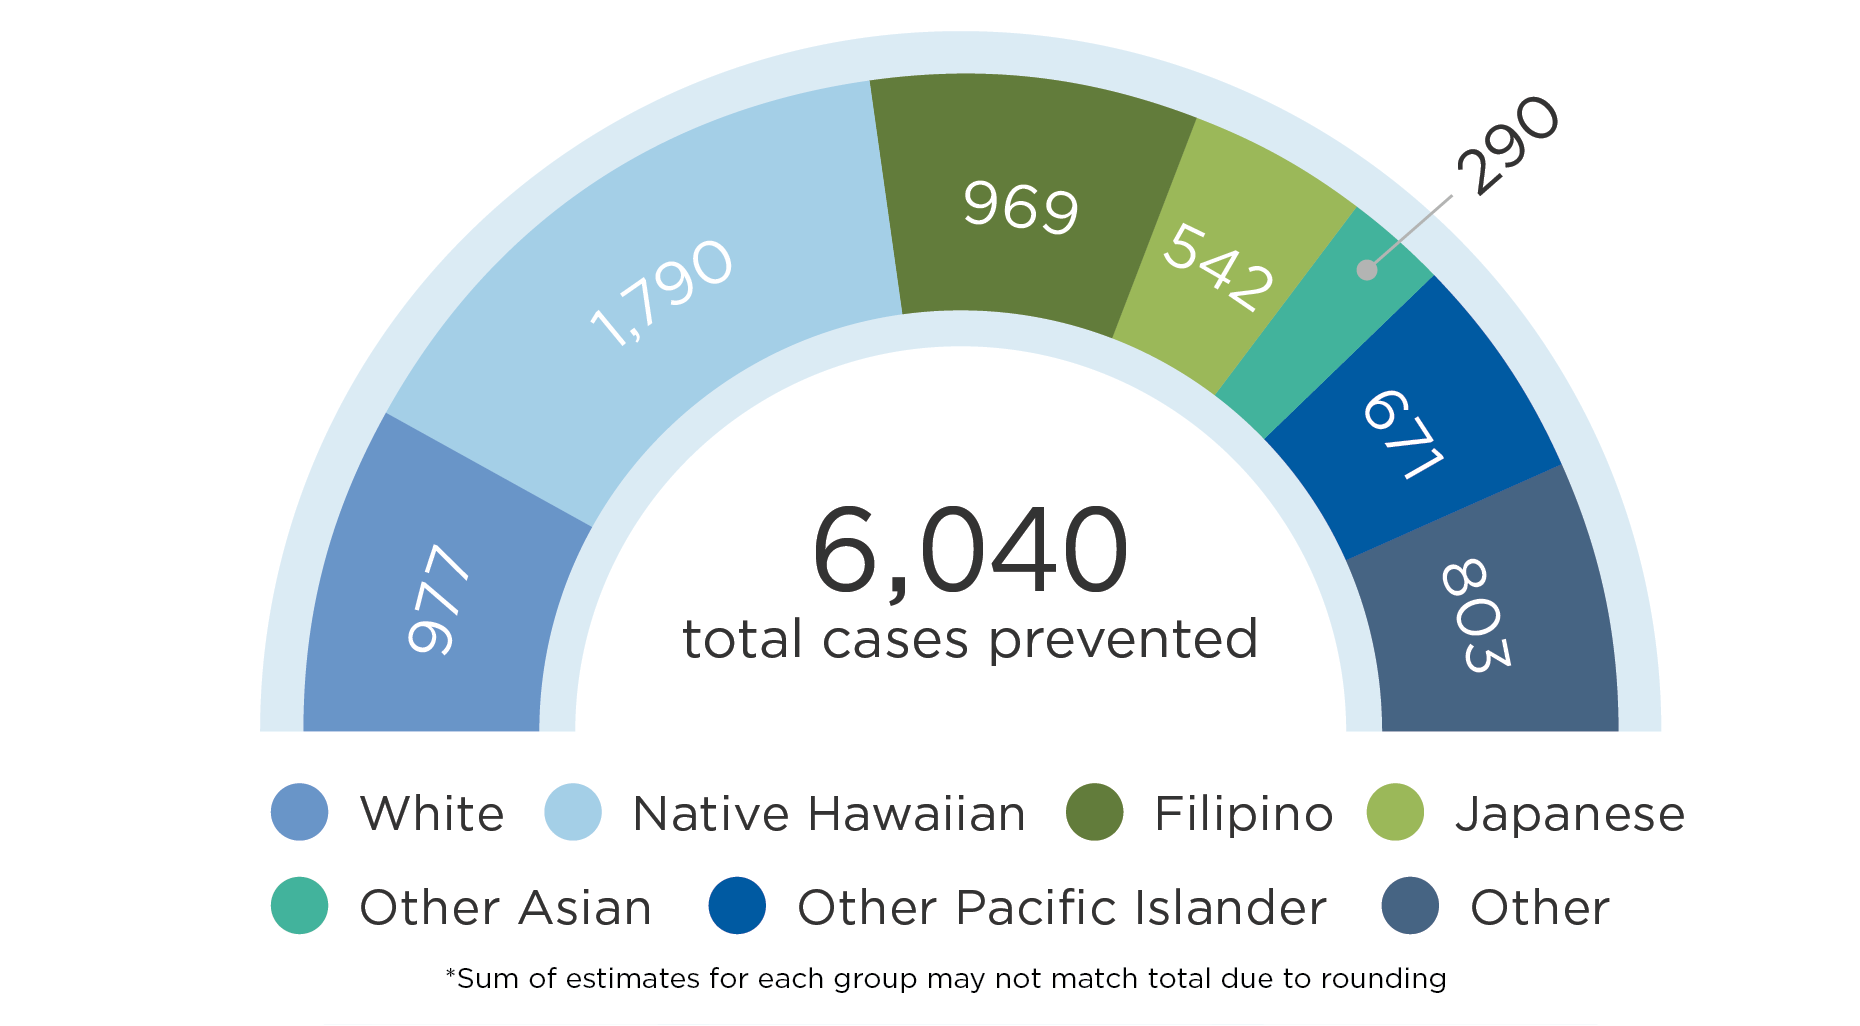 In 2027, 977 cases of obesity would be prevented among White residents; 1,790 cases of obesity would be prevented among Native Hawaiian residents; 969 cases of obesity would be prevented among Filipino residents; 542 cases of obesity would be prevented among Japanese residents; 290 cases of obesity would be prevented among Other Asians residents; 671 cases of obesity would be prevented among Other Pacific Islander residents; and 803 cases of obesity would be prevented among residents of other races